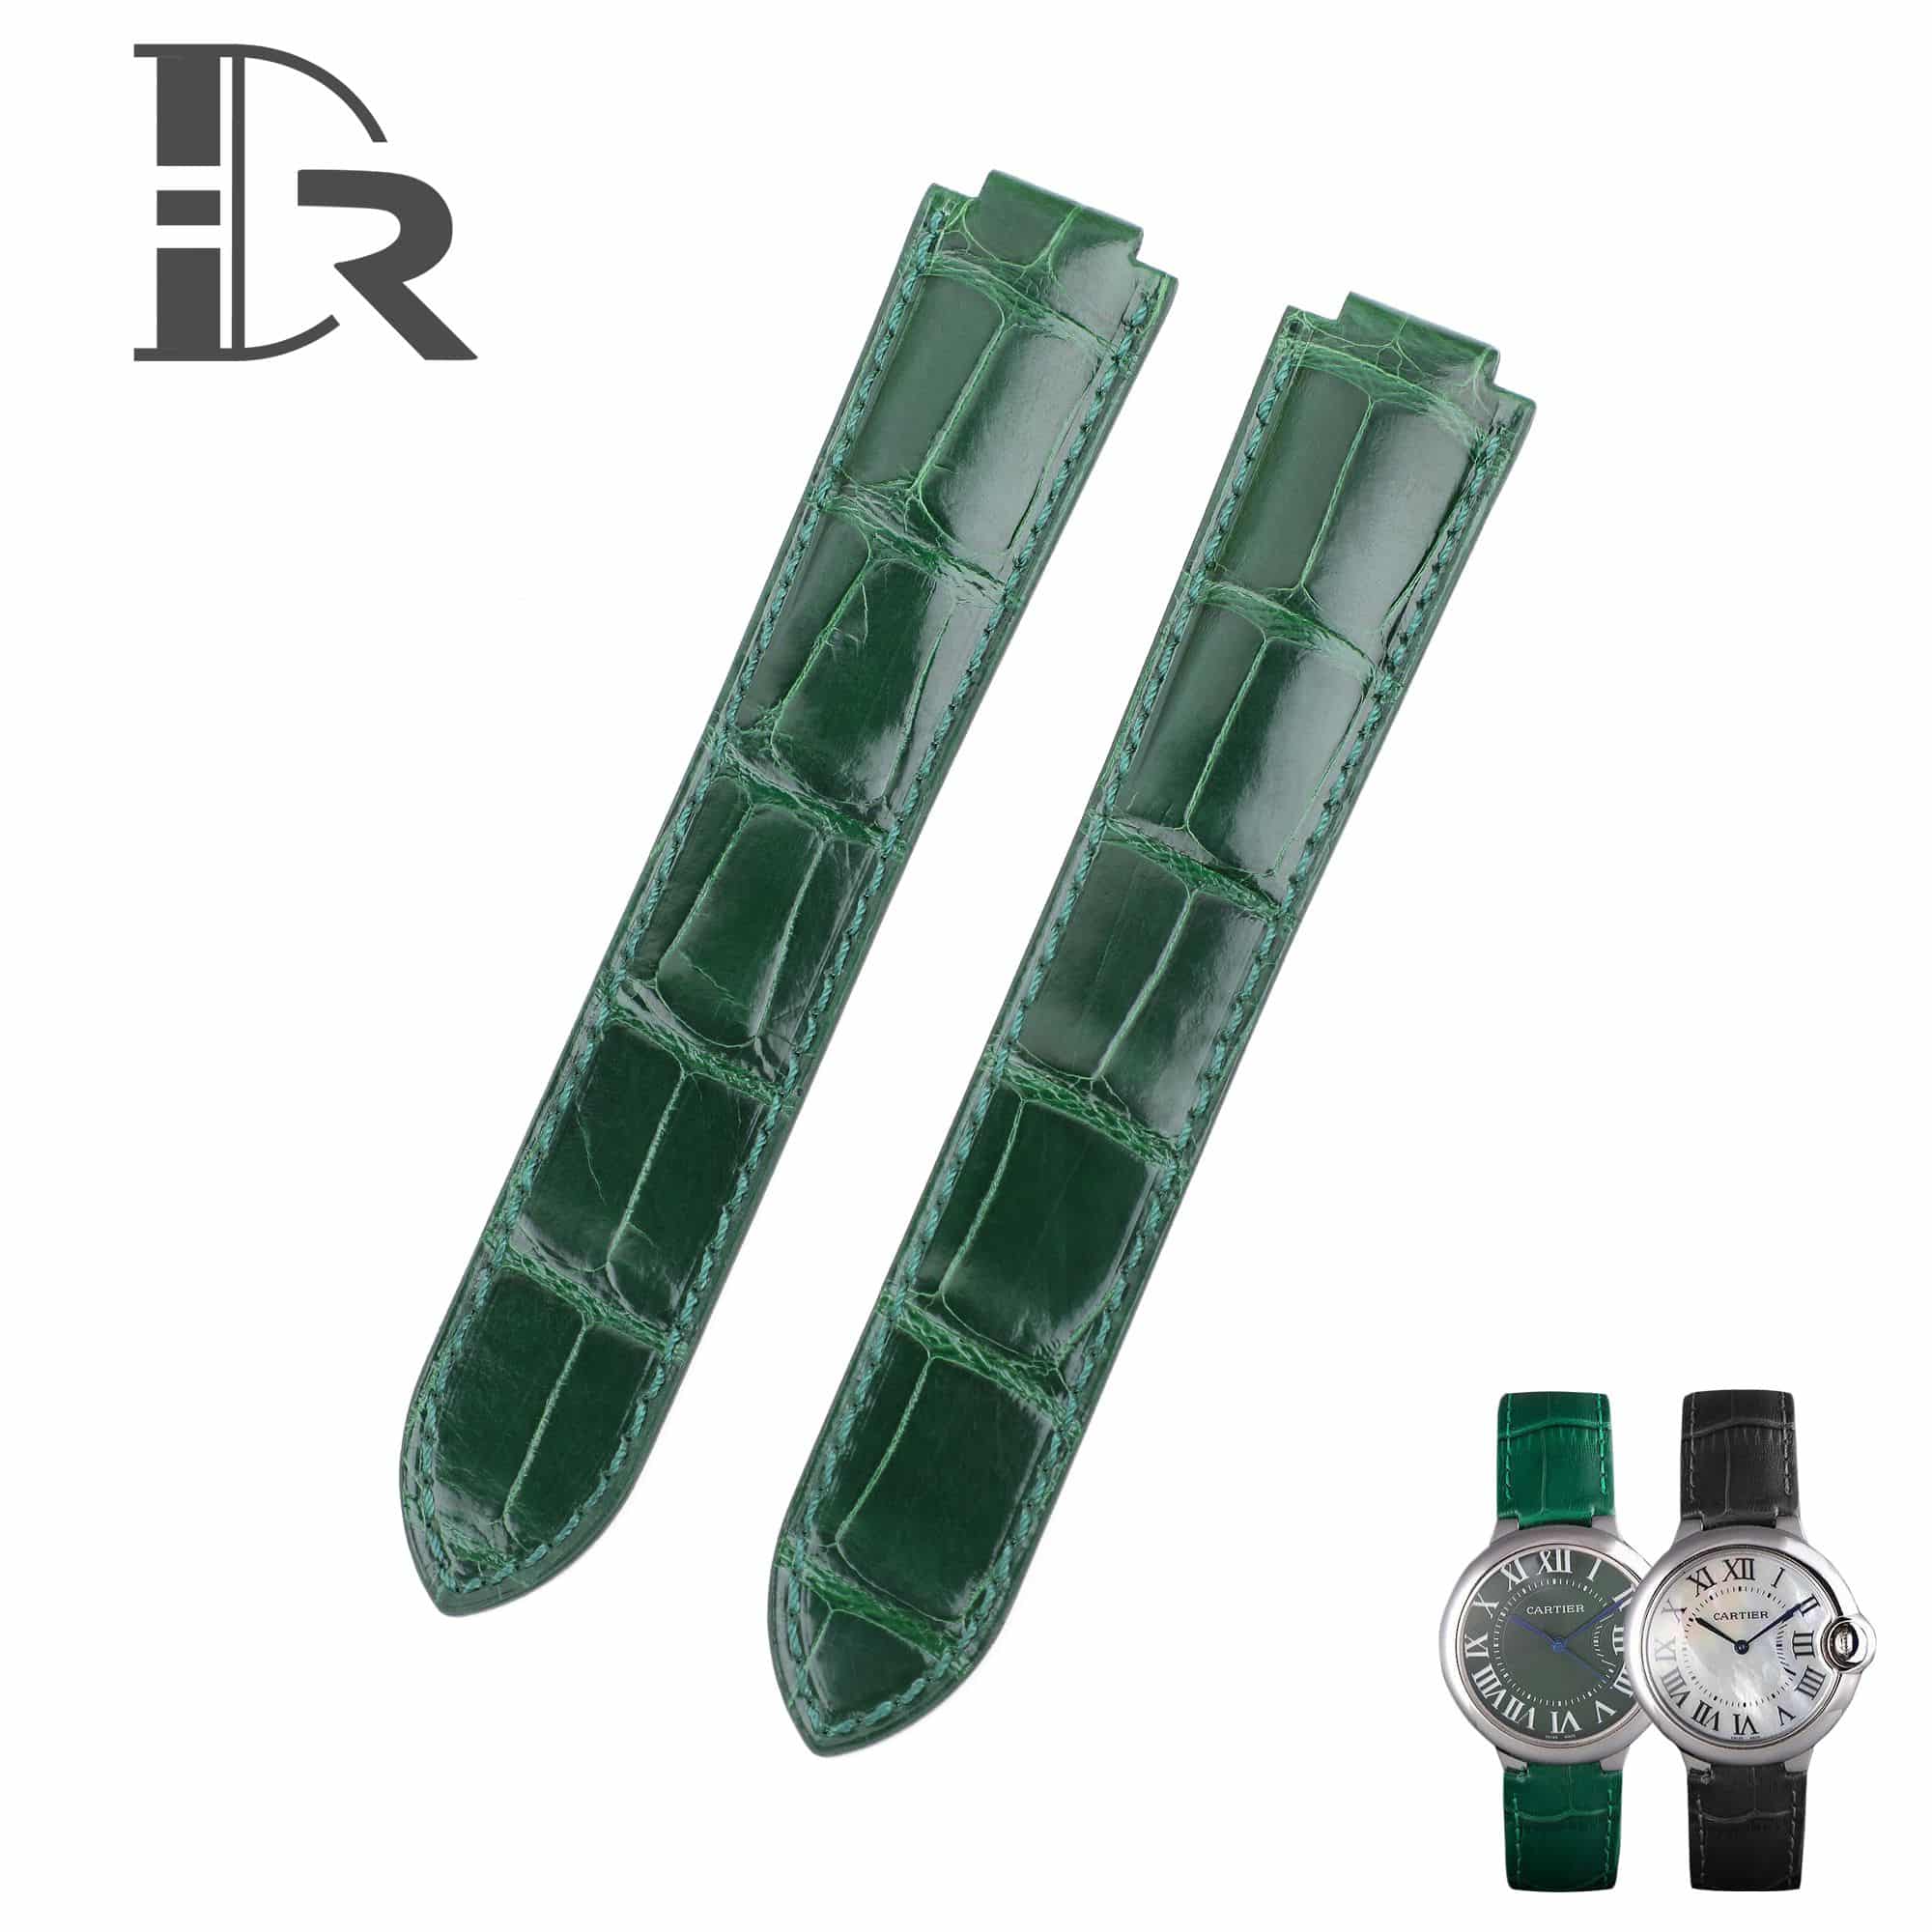 Genuine custom green alligator leaher strap and watch band replacement for Cartier Ballon bleu watches - OEM high-end quality watch bands online at a low price